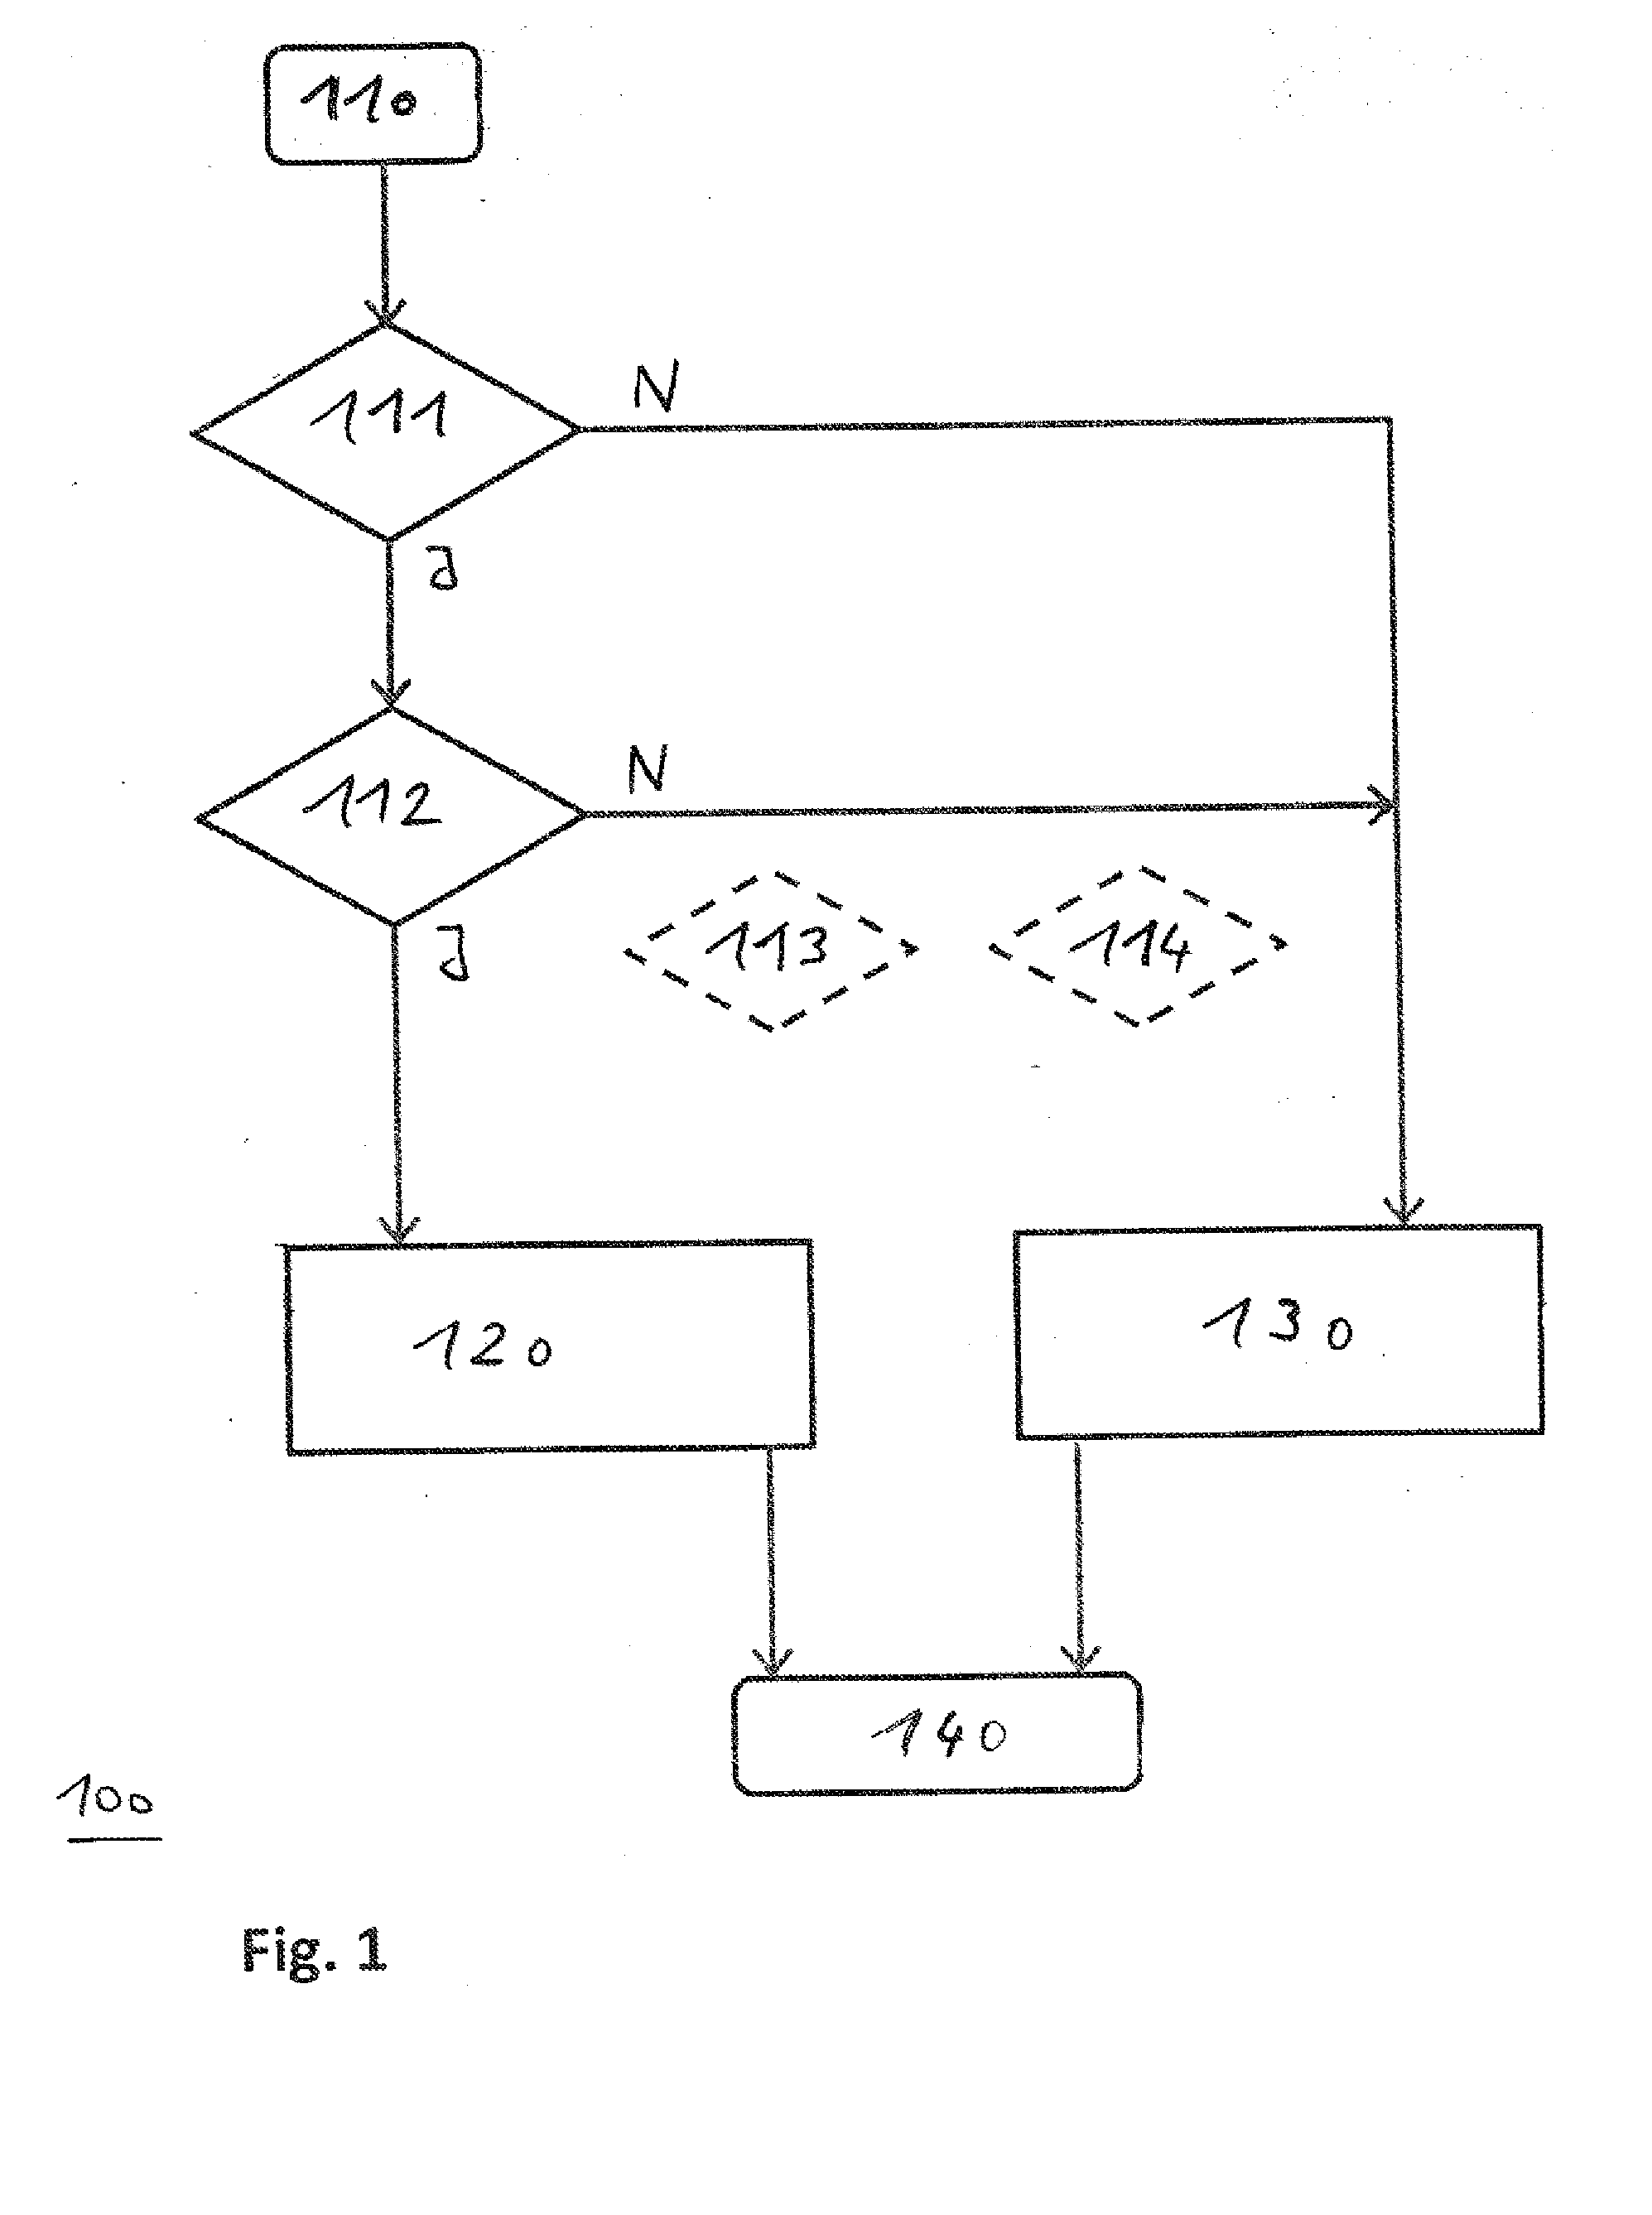 Method for defending against cold-boot attacks on a computer in a self-service terminal